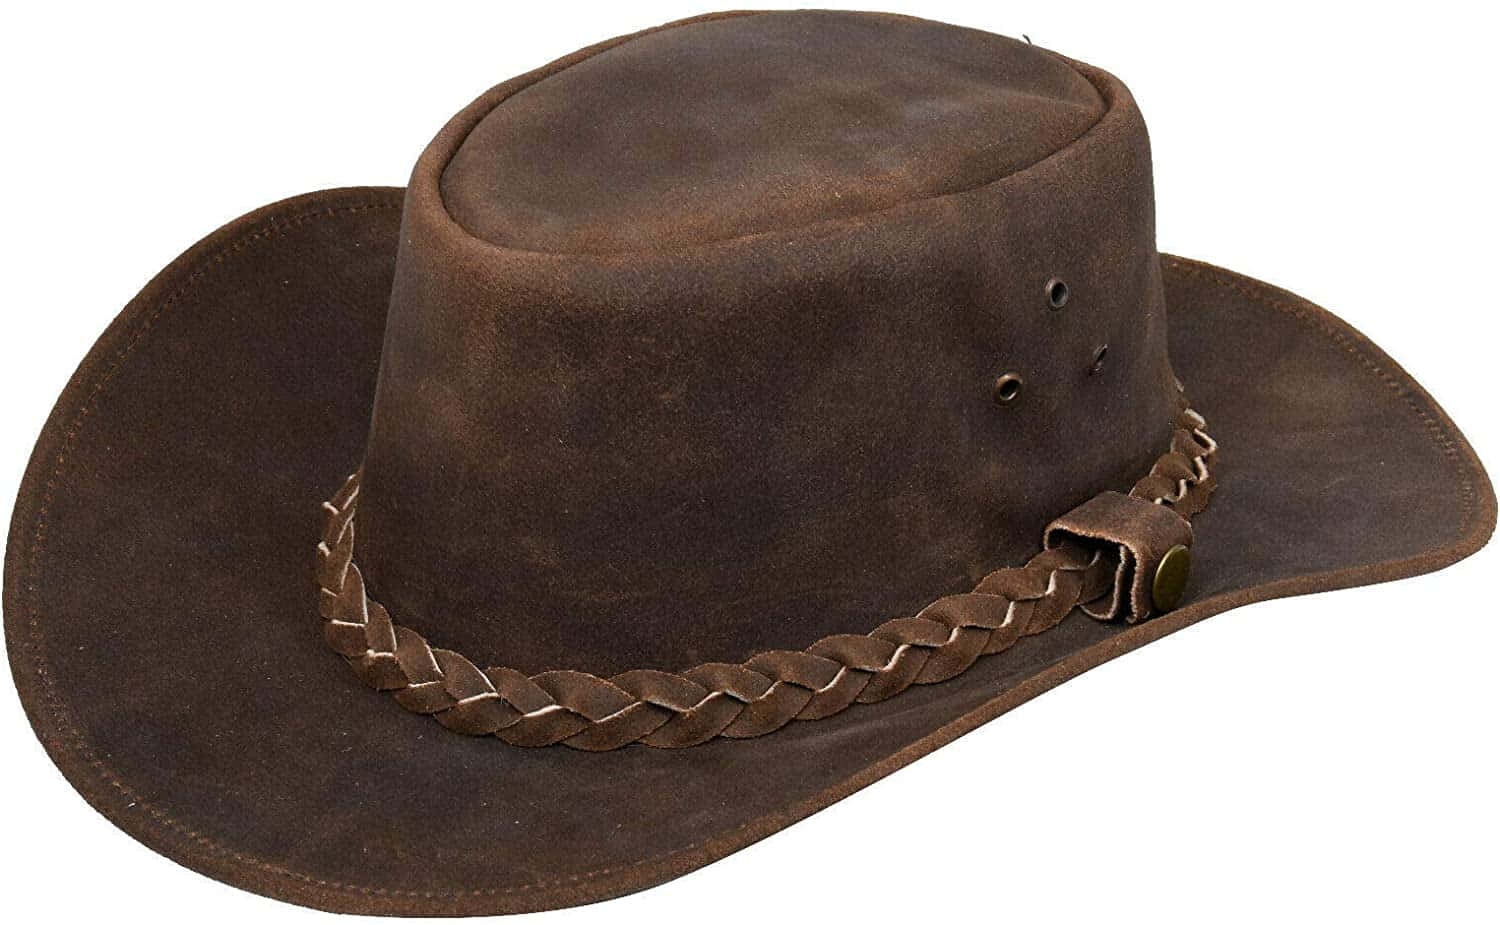 Cowboys of all ages are sure to love this timeless, classic hat.